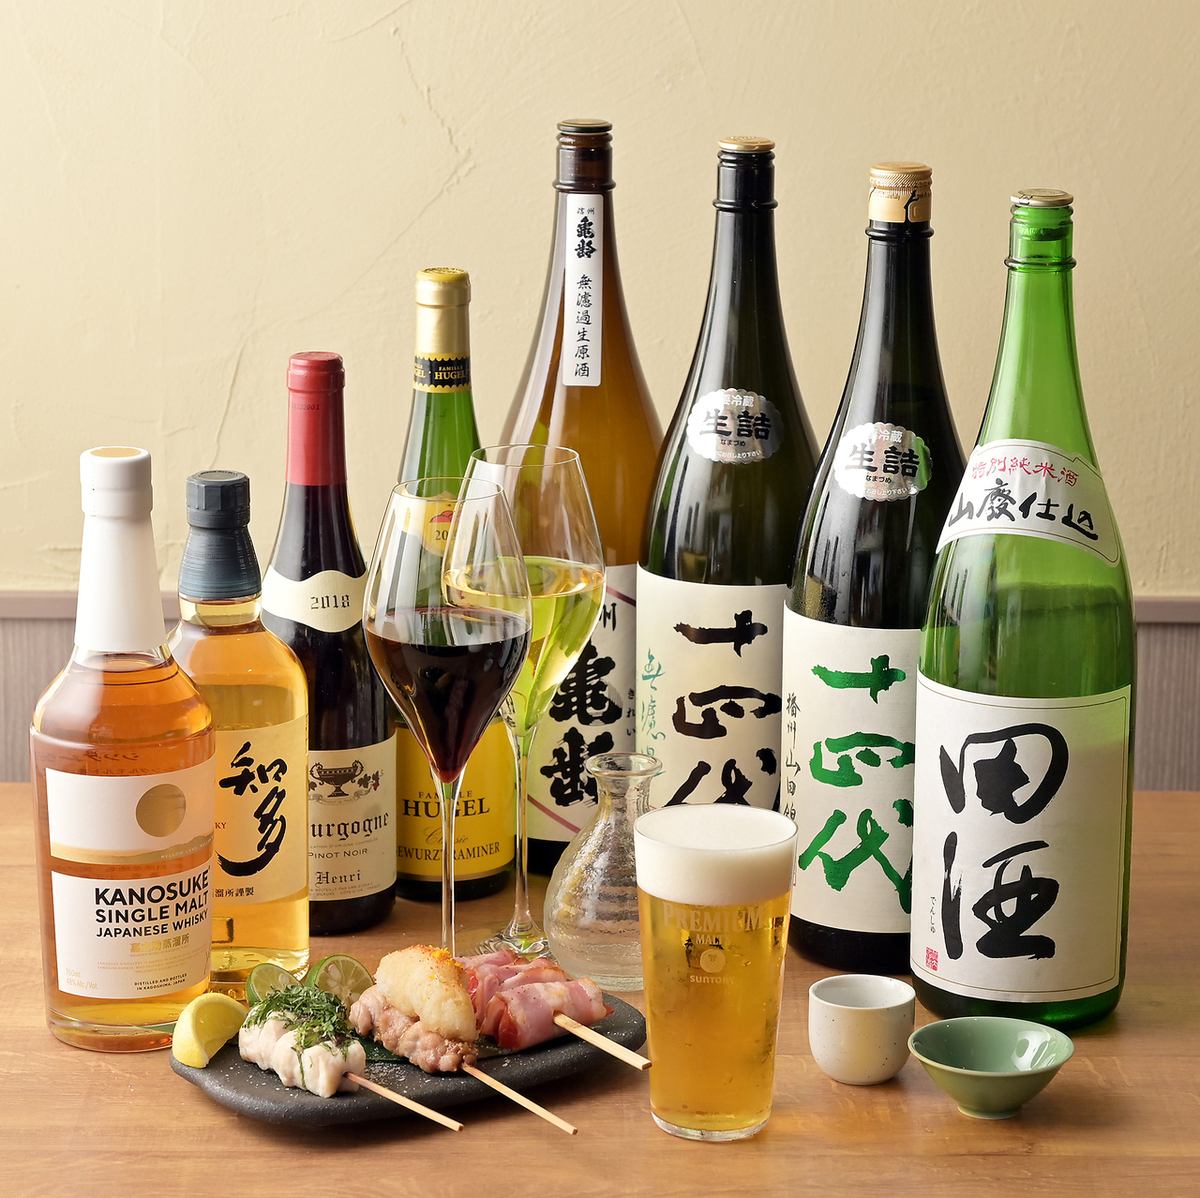 Our all-you-can-drink courses are available from 5,000 yen!